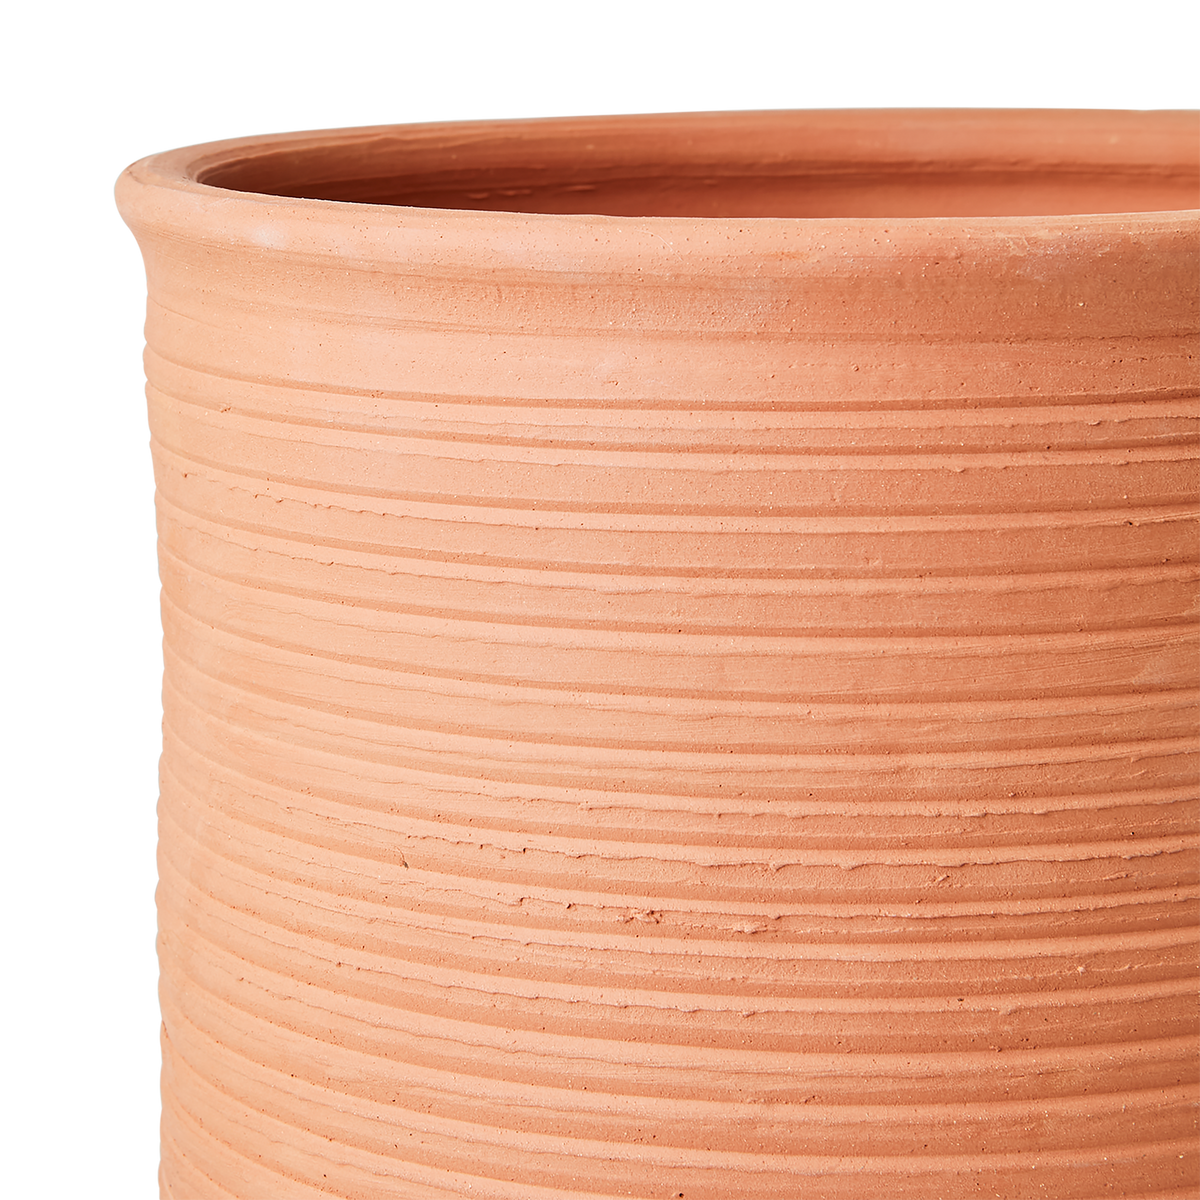 Hand-carved ridging and simple forms come together in the Ridge Terracotta Pot.